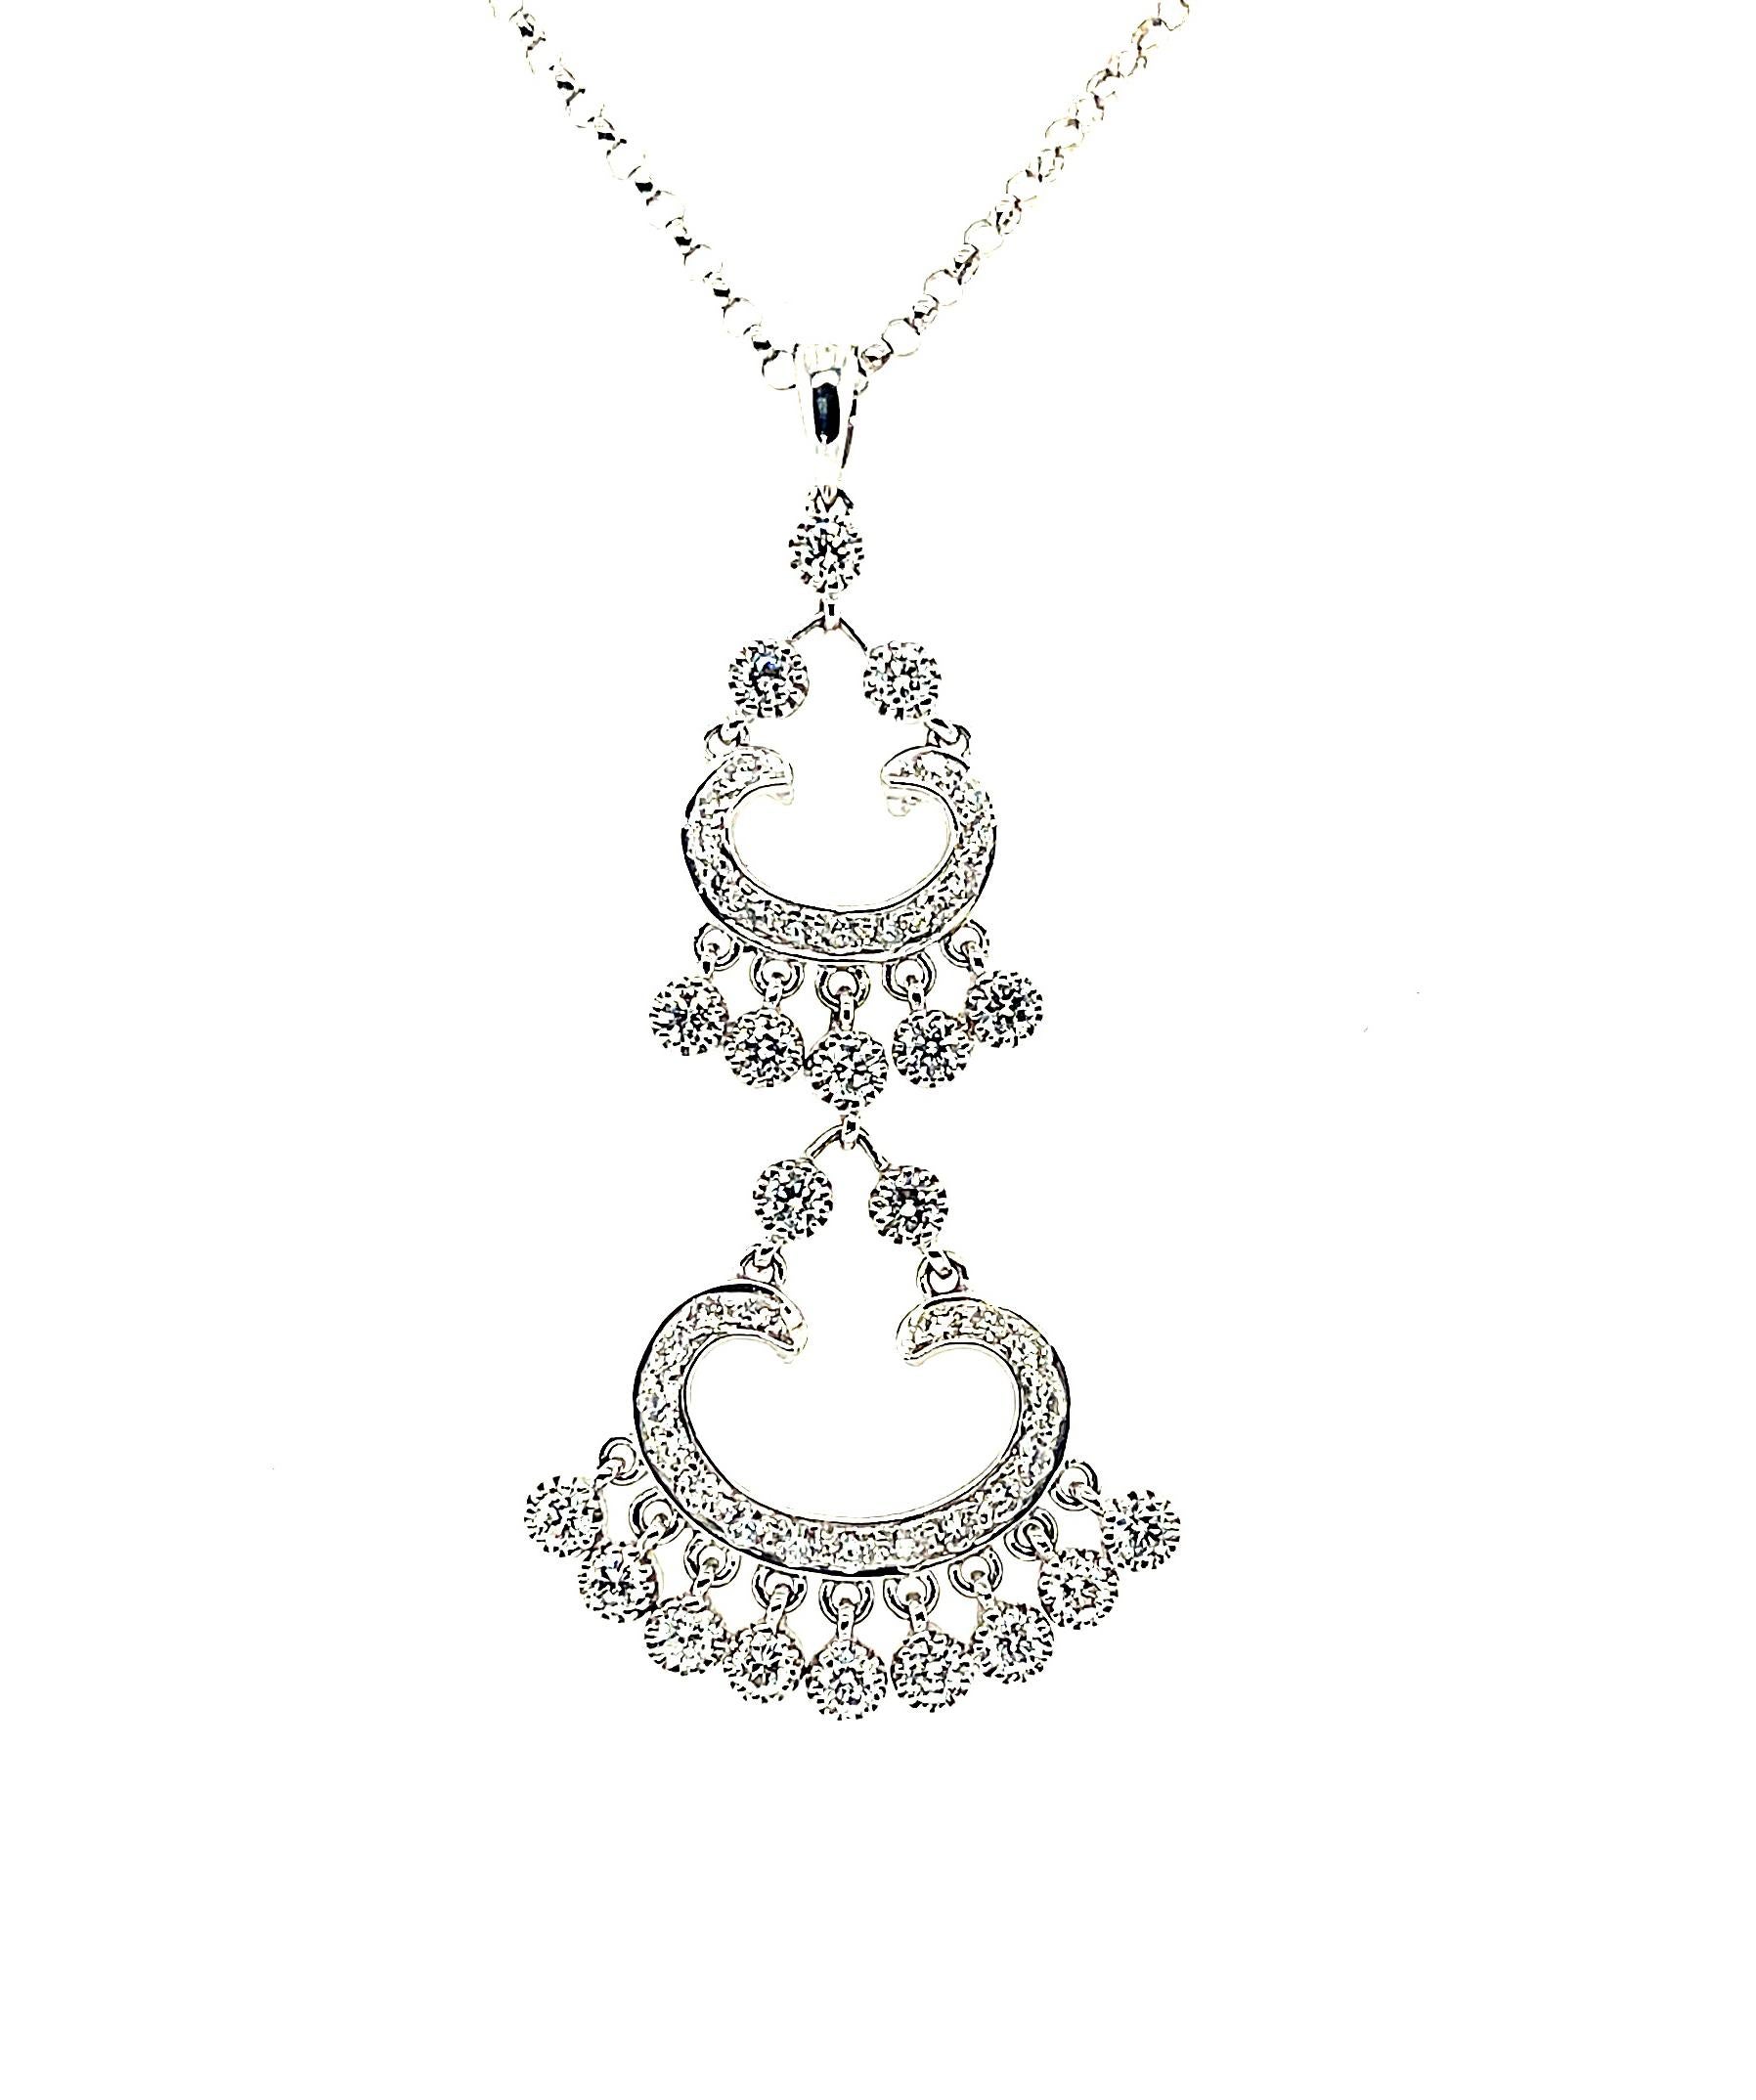 Style and grace combine to create this lacy, Victorian era inspired diamond drop pendant. The intricate design comes to life with sparkling round brilliant cut diamonds, with just enough movement to make this necklace fun to wear yet remain refined